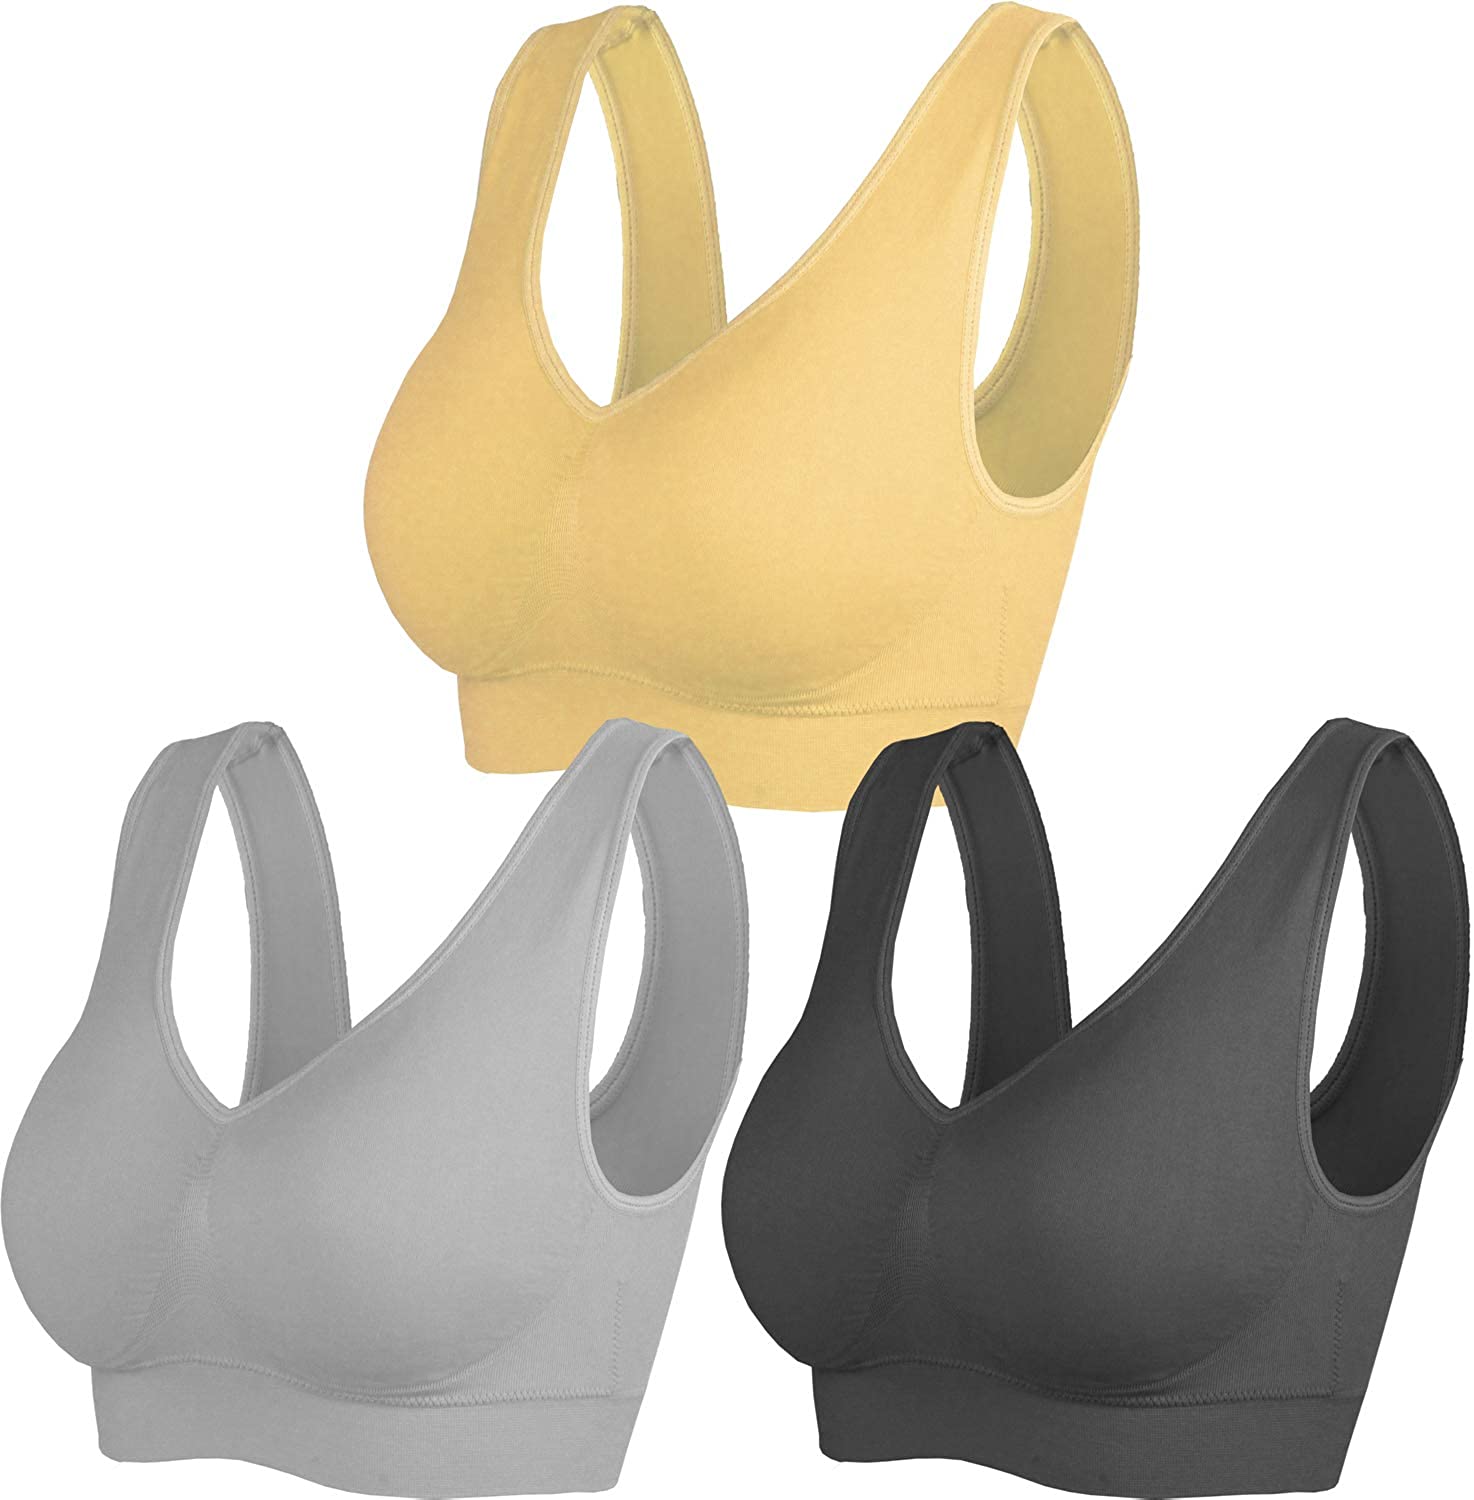 KINYAOYAO 3 Pack Women's Ultimate Comfy Medium Support Seamless